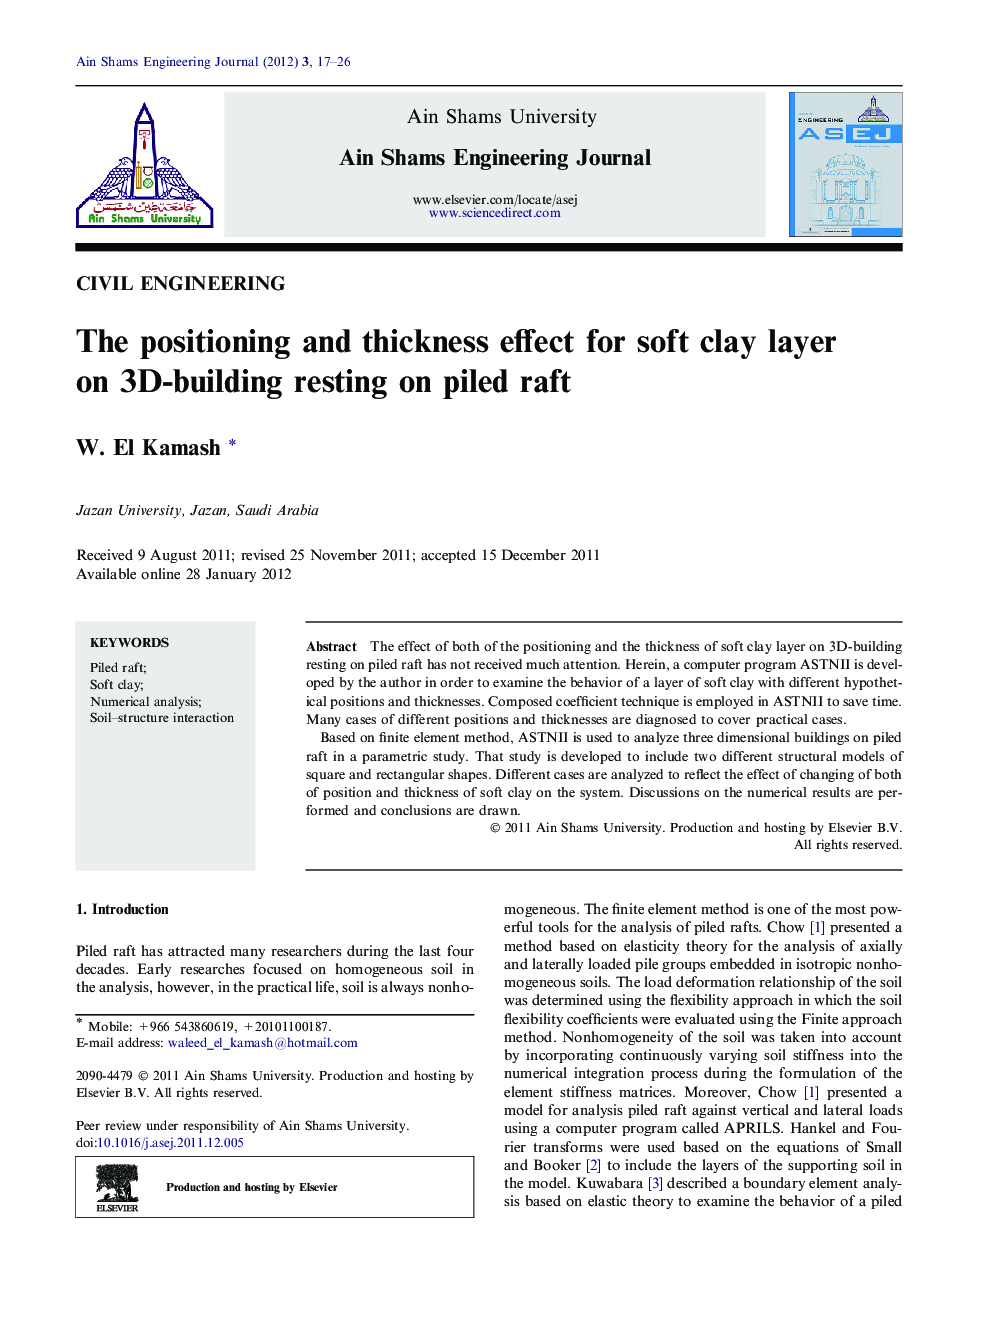 The positioning and thickness effect for soft clay layer on 3D-building resting on piled raft